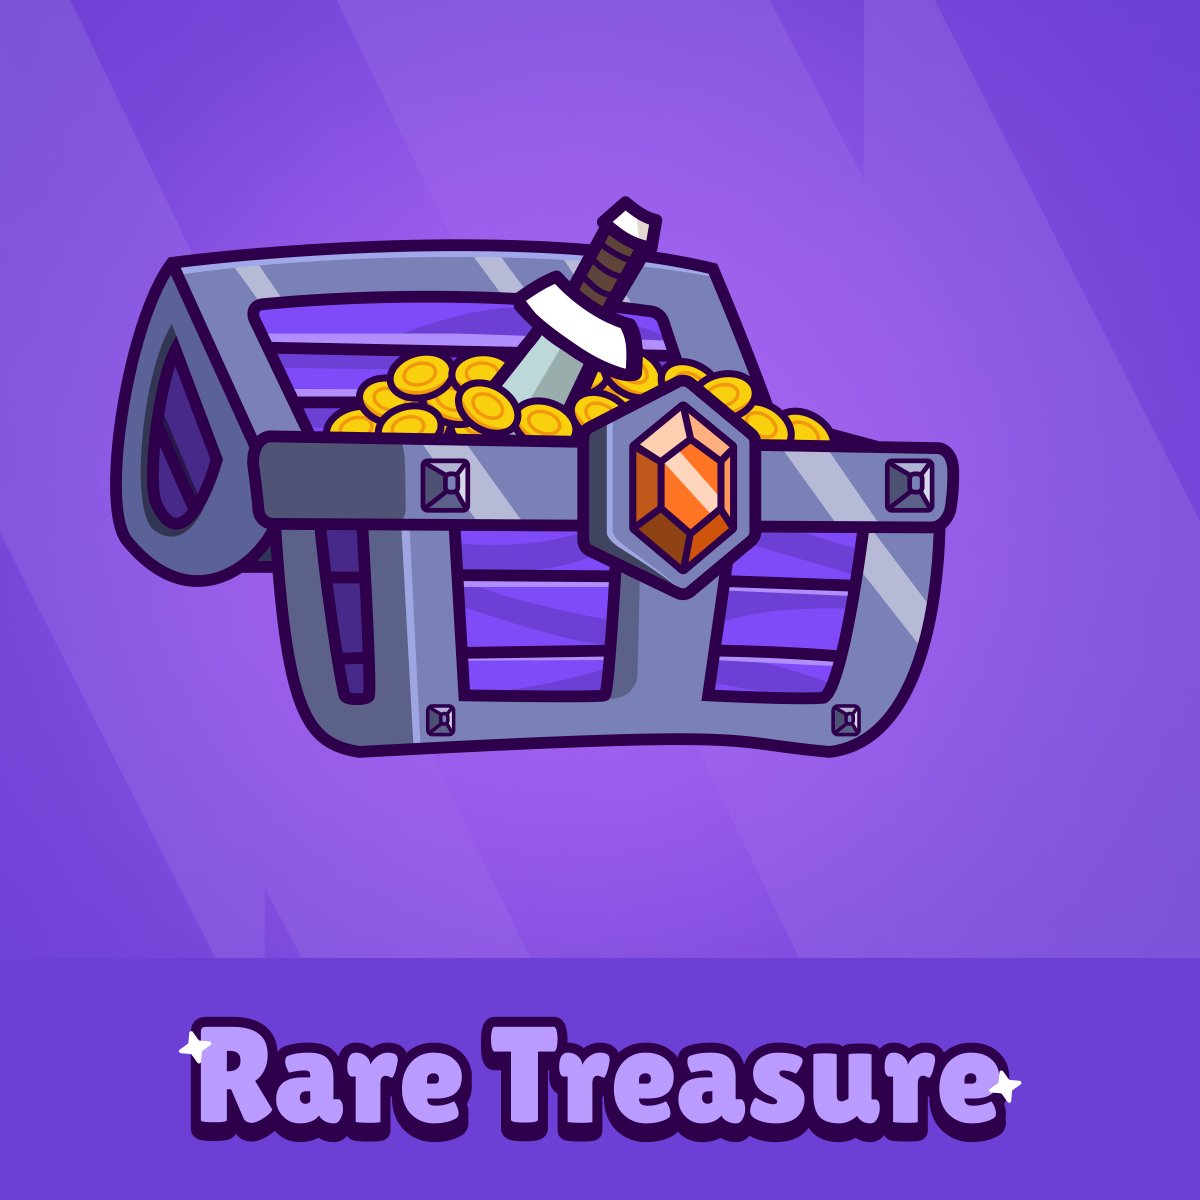 B2Y...rG5 obtained Rare Chest from a Treasure chest! @FamousFoxFed #FamousFoxes #Missions